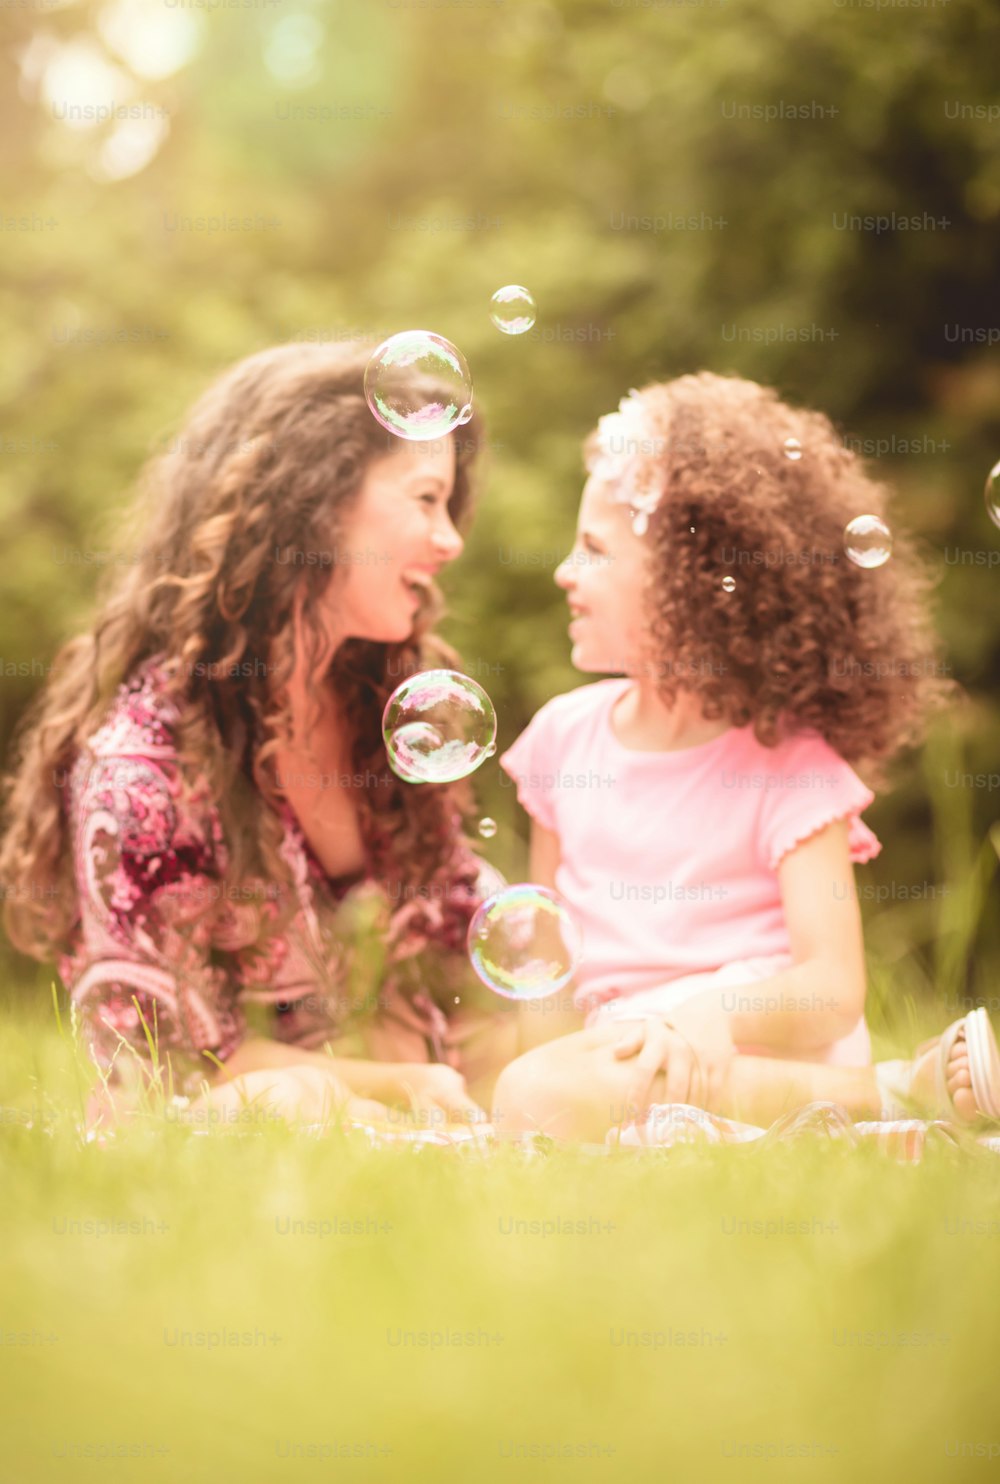 Bubbles time. Mother and daughter in nature. Focus is on bubble.